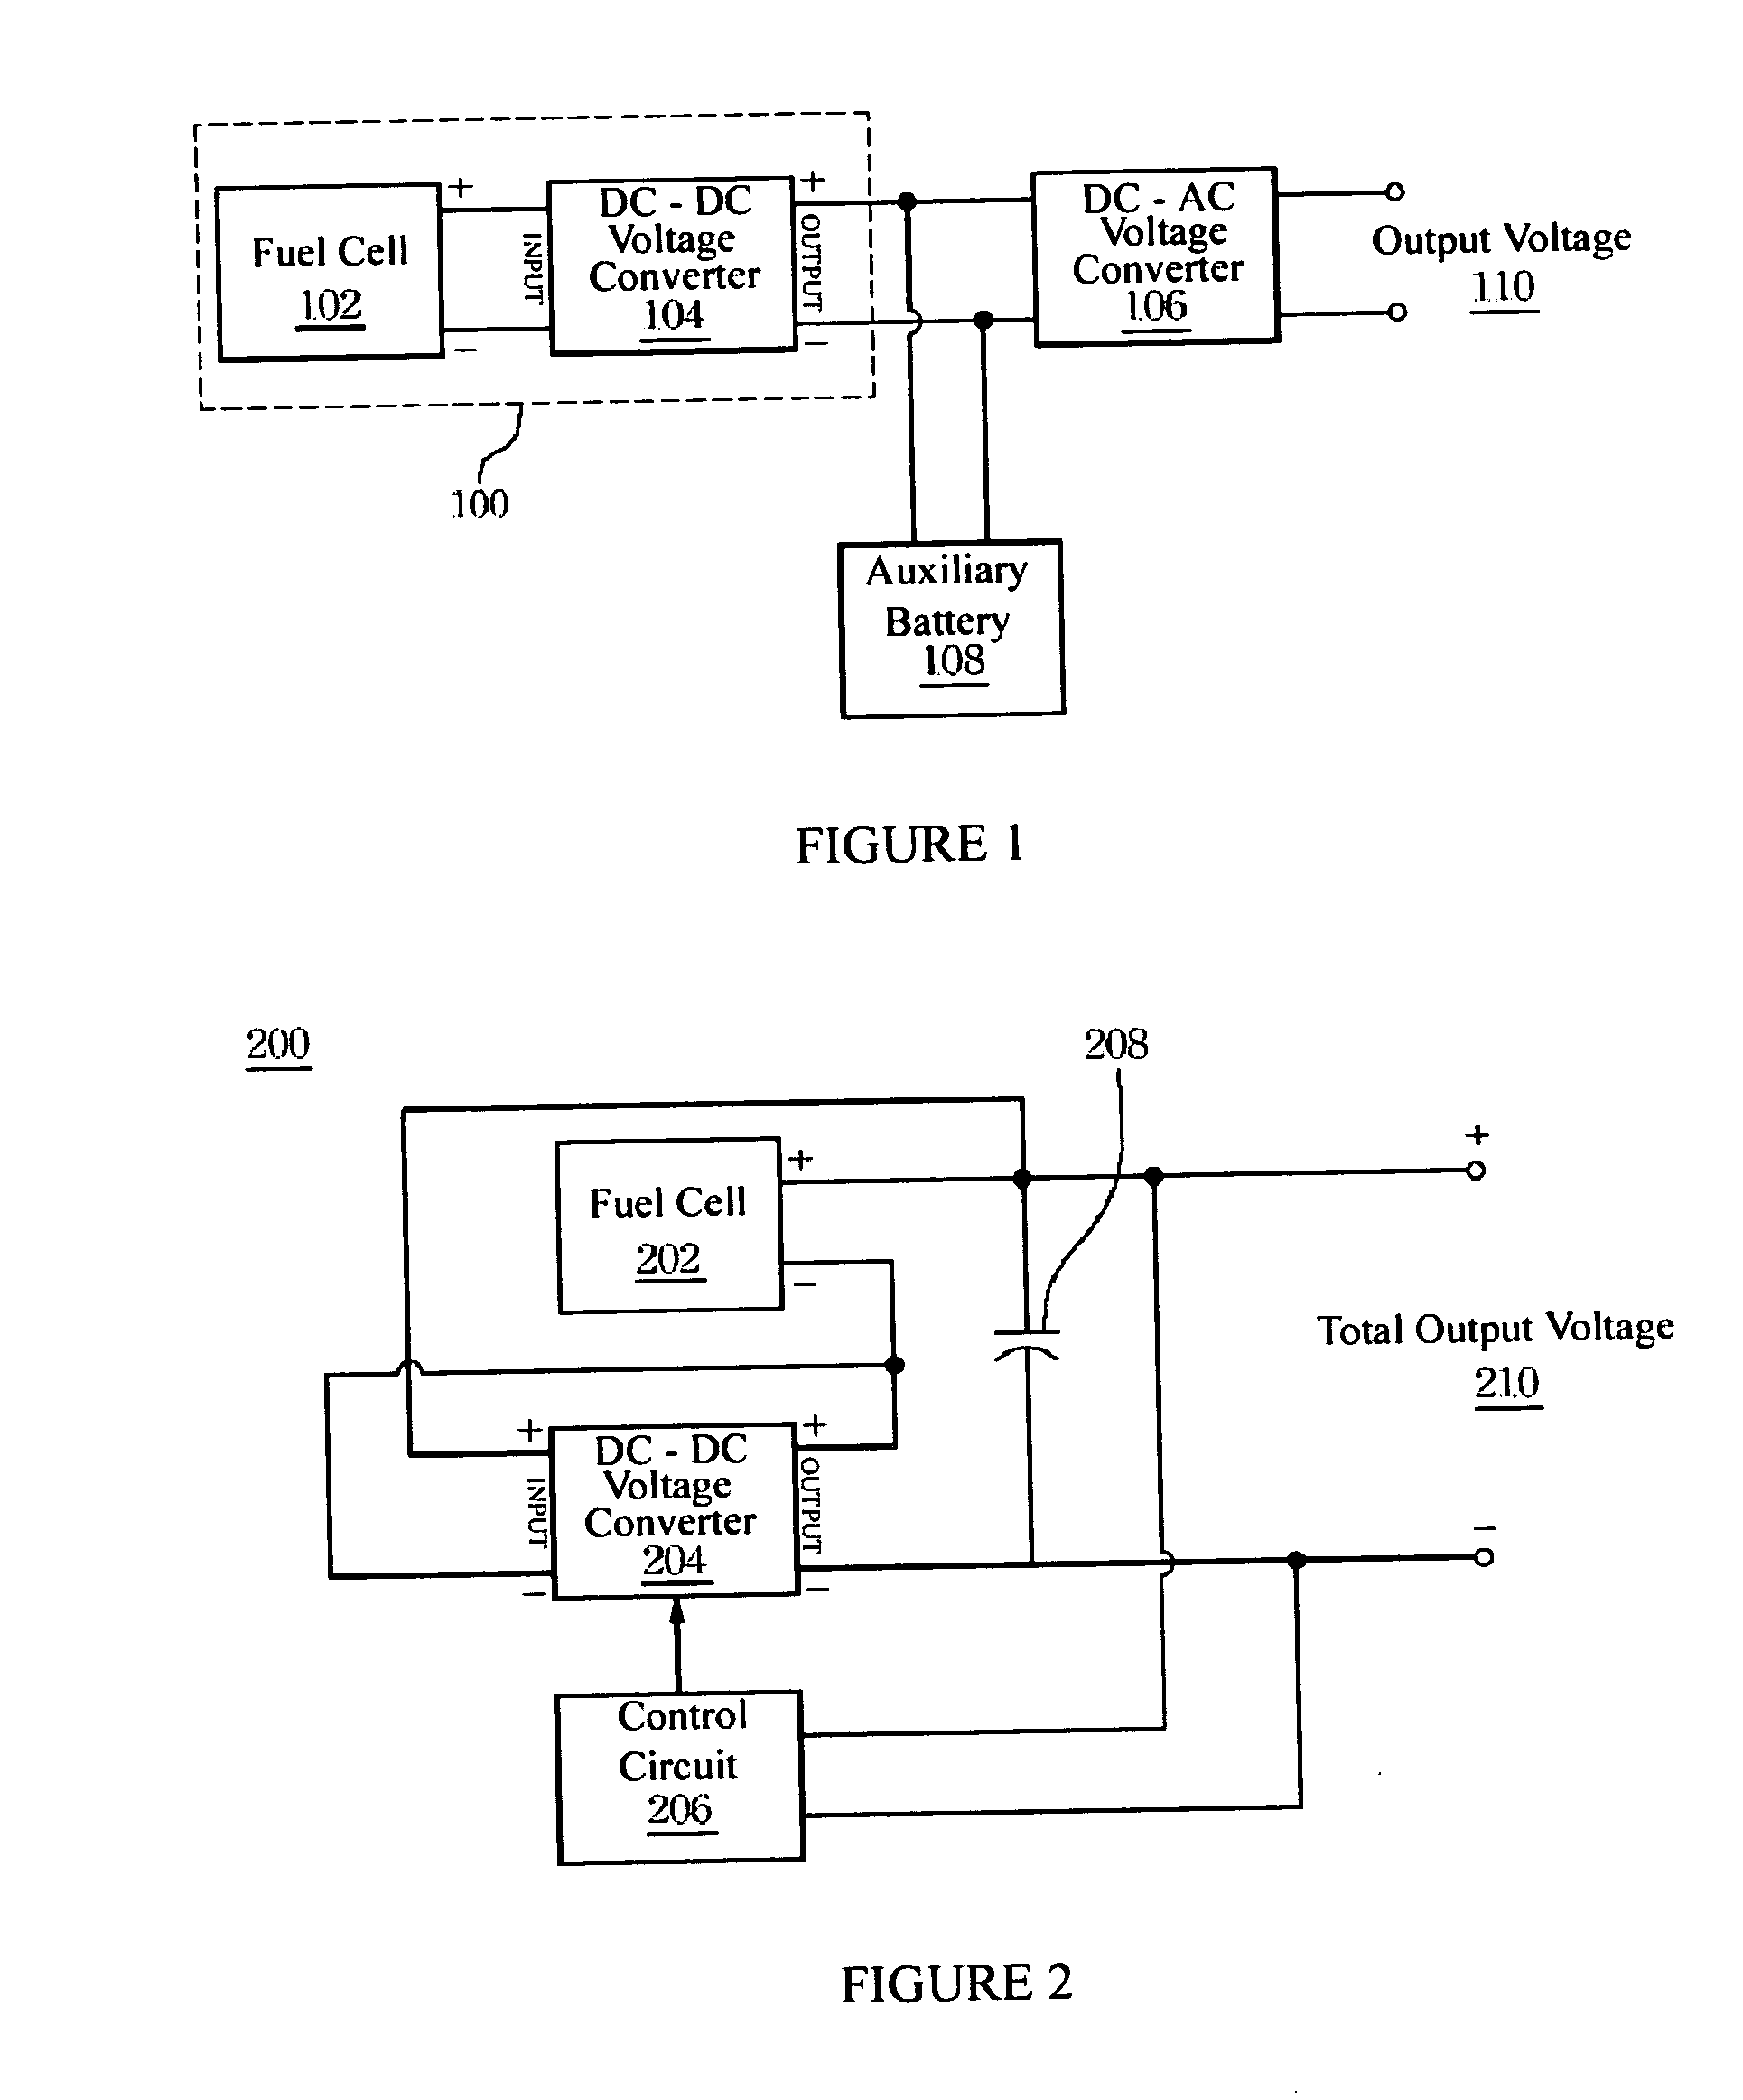 Voltage supplying apparatus using a fuel cell